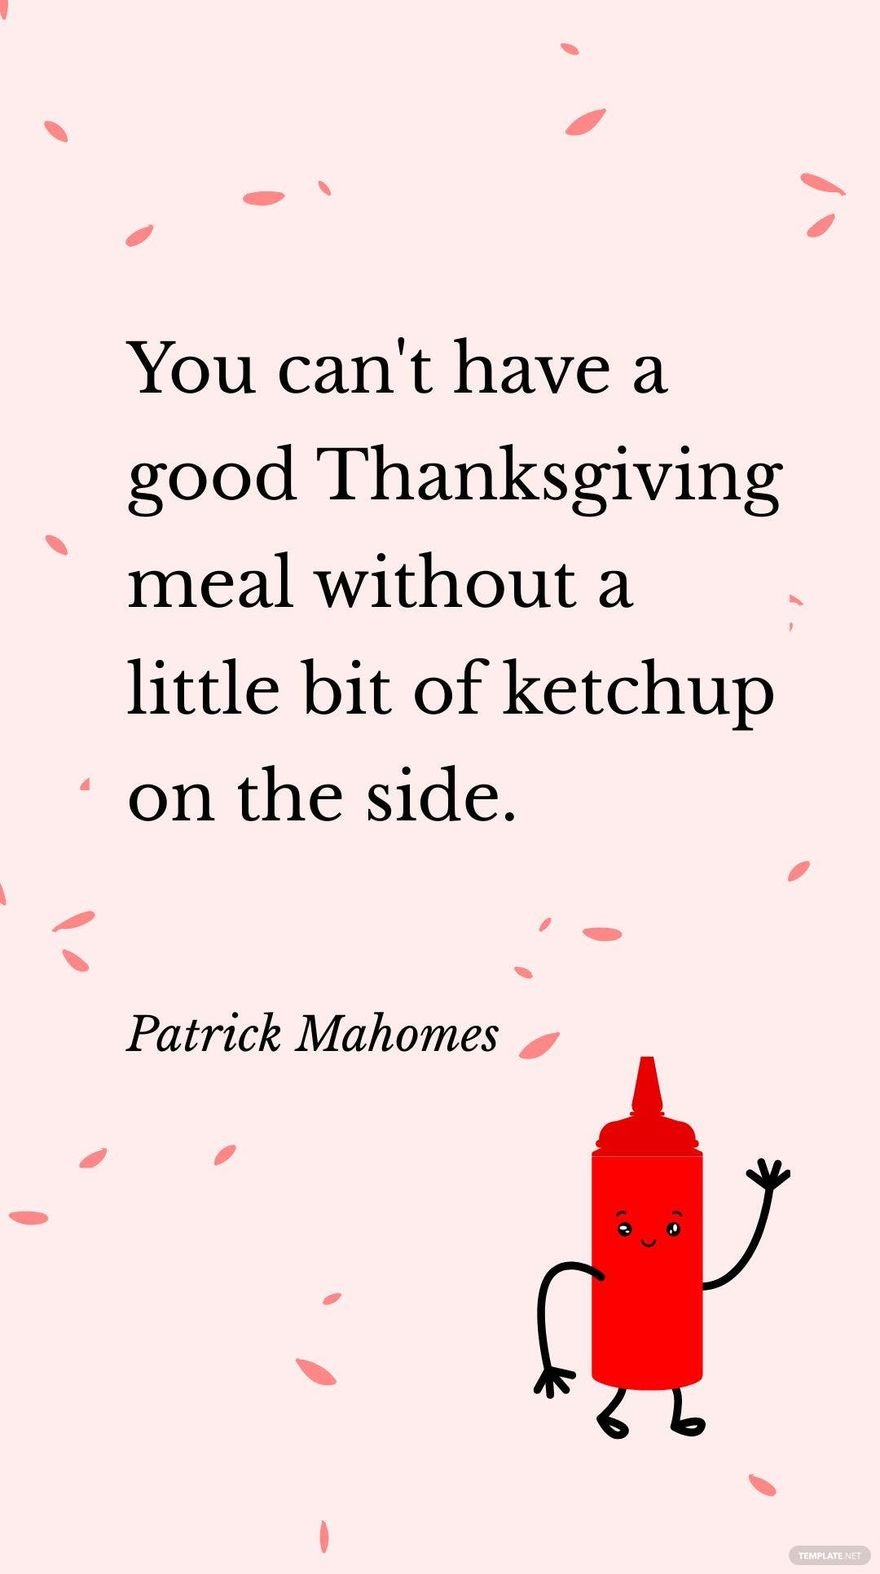 Free Patrick Mahomes - You can't have a good Thanksgiving meal without a little bit of ketchup on the side.